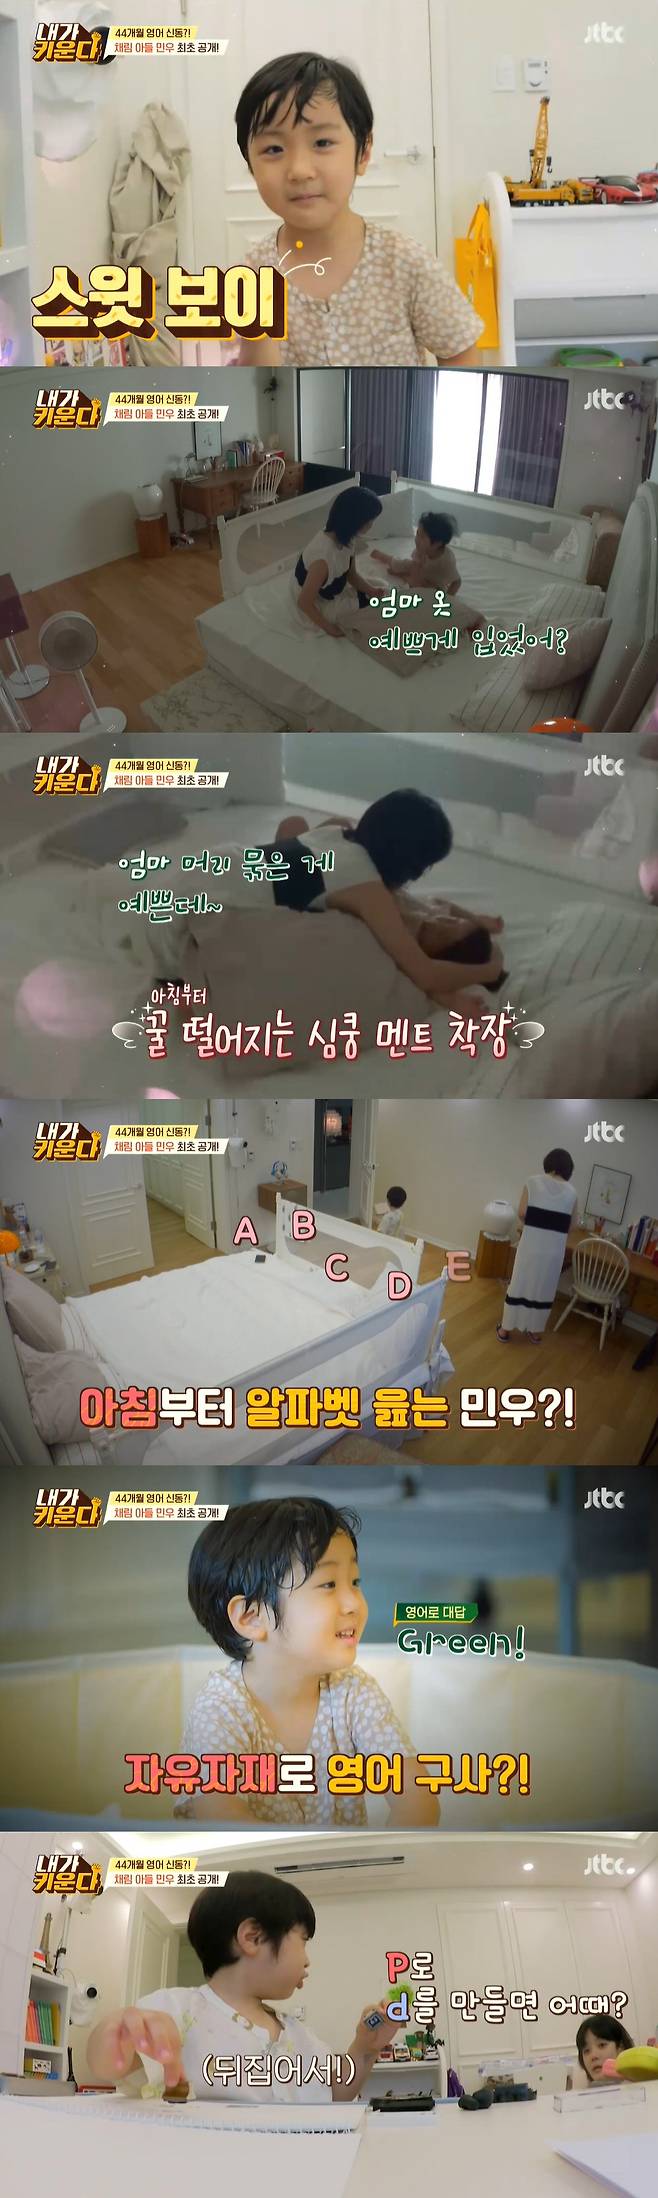 Actor Chae Rims 44-month son was a sweet boy with a full appeal.JTBC Brave Solo Childcare - I raise it on the 17th, the 4th year of solo child care Chae Rim revealed his daily life with his 44-month son Minwoo for the first time.Minwoo, who opened his eyes in bed on the day, said to his mother, Did you wear your mothers clothes beautifully?, It is pretty that my mothers hair is tied up. Minwoo is a 5-year-old English language language Shindong. Minwoo has been reading the alphabet since morning and surprised mothers by speaking English language language freely.In addition, water kimchi, fish, raw eggs, such as soup, such as eating a million views of the new food star over the place of the new food star predicted.In addition, Chaerims house was also unveiled for the first time, attracting attention from the living room of a clean and modern interior.Here, three Refrigerators with various materials at all times for Minwoo, and a childcare warehouse equipped with everything were also revealed slightly, making mothers mouths open.The daily life of Minwoo, a son who is full of charm, and the special childcare of Chaerim raised questions.